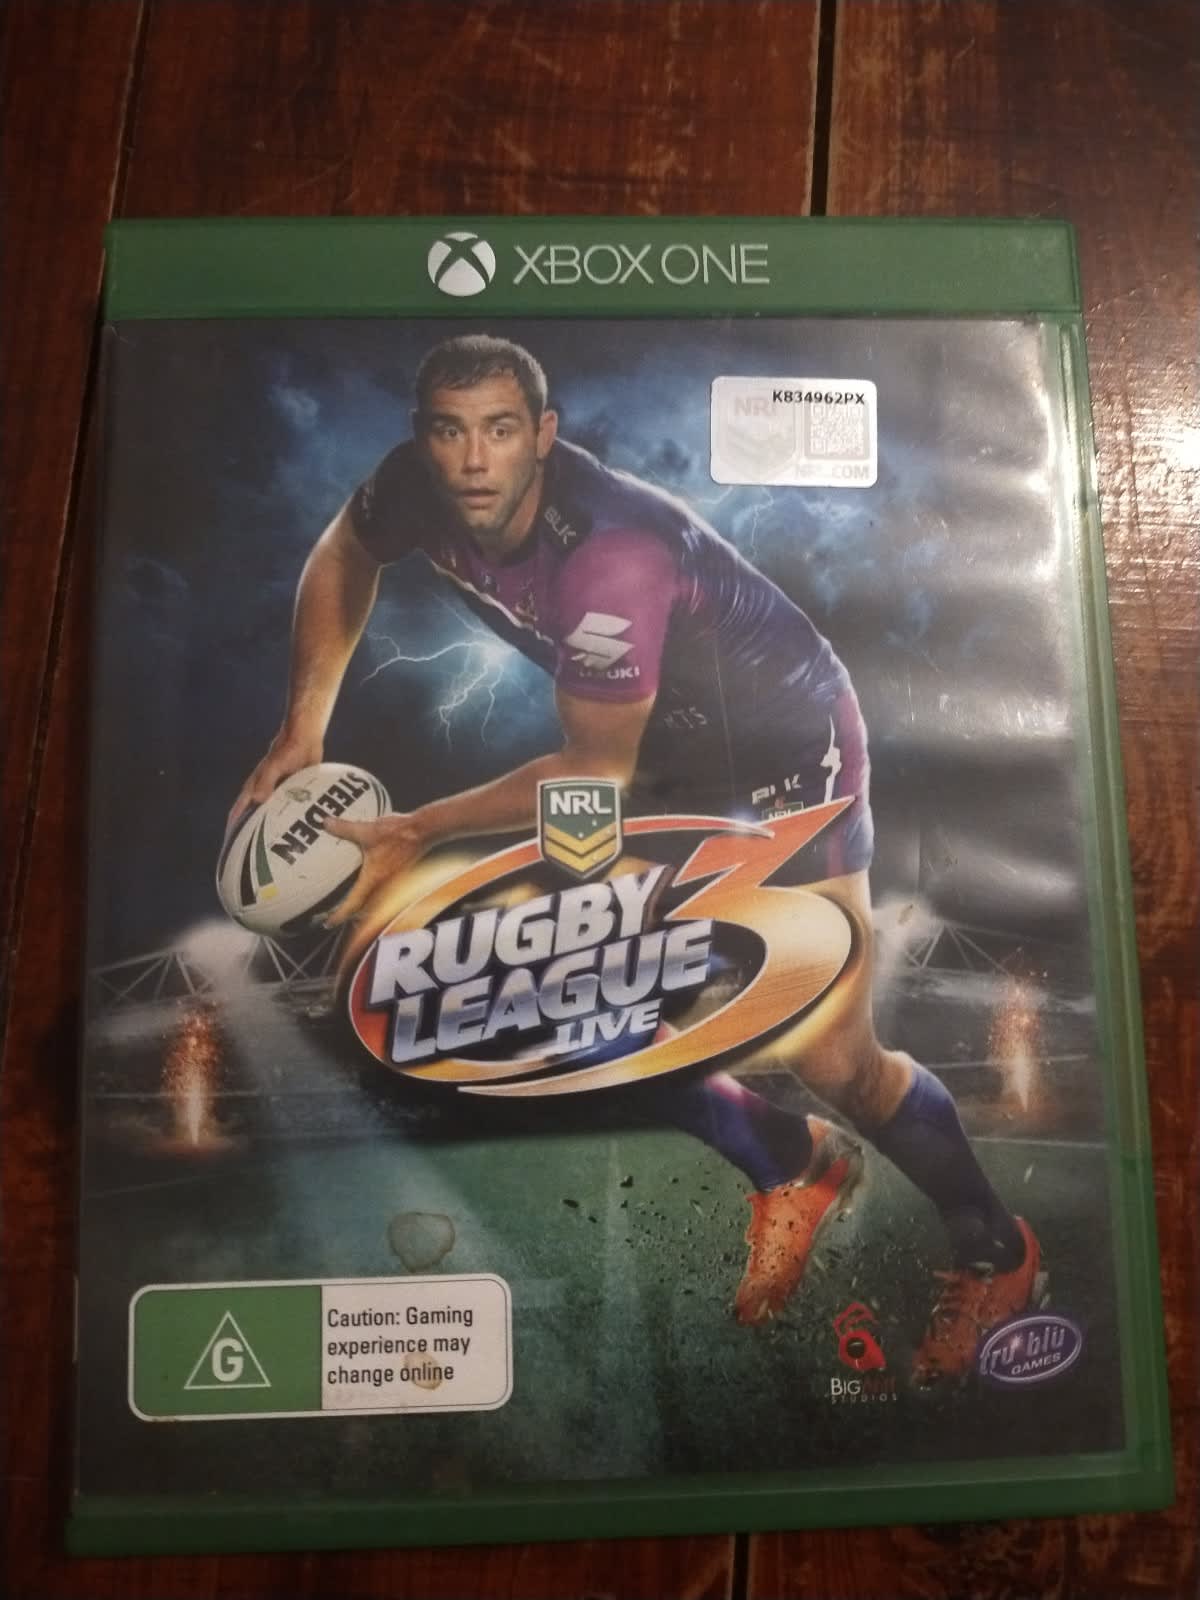 rugby league live 3 Video Games and Consoles Gumtree Australia Free Local Classifieds